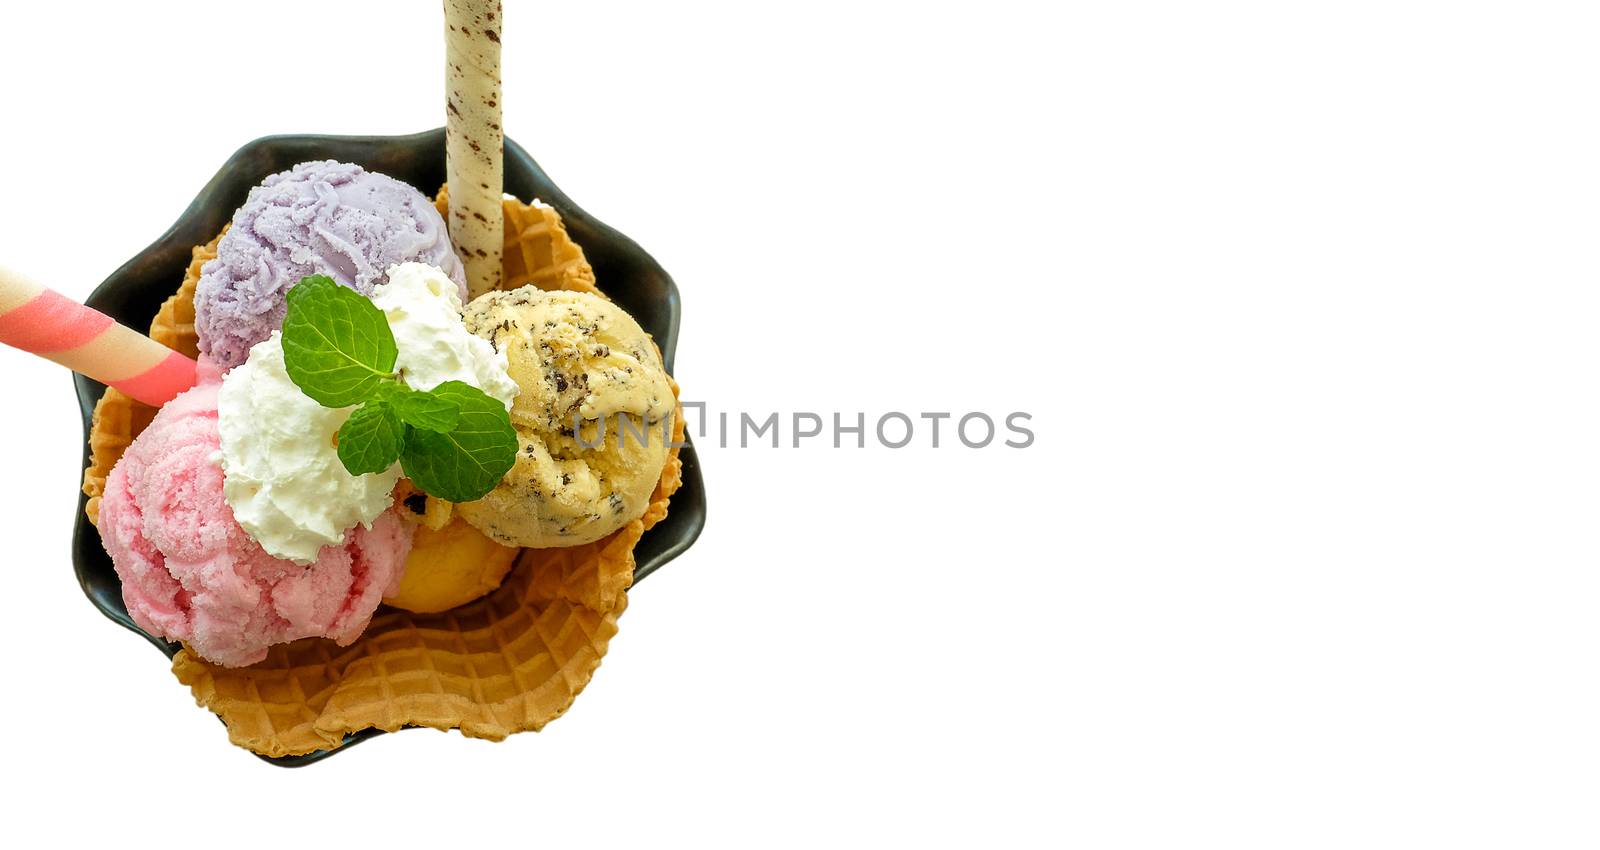 three scoops of ice cream in a waffle, top view, isolated in white background